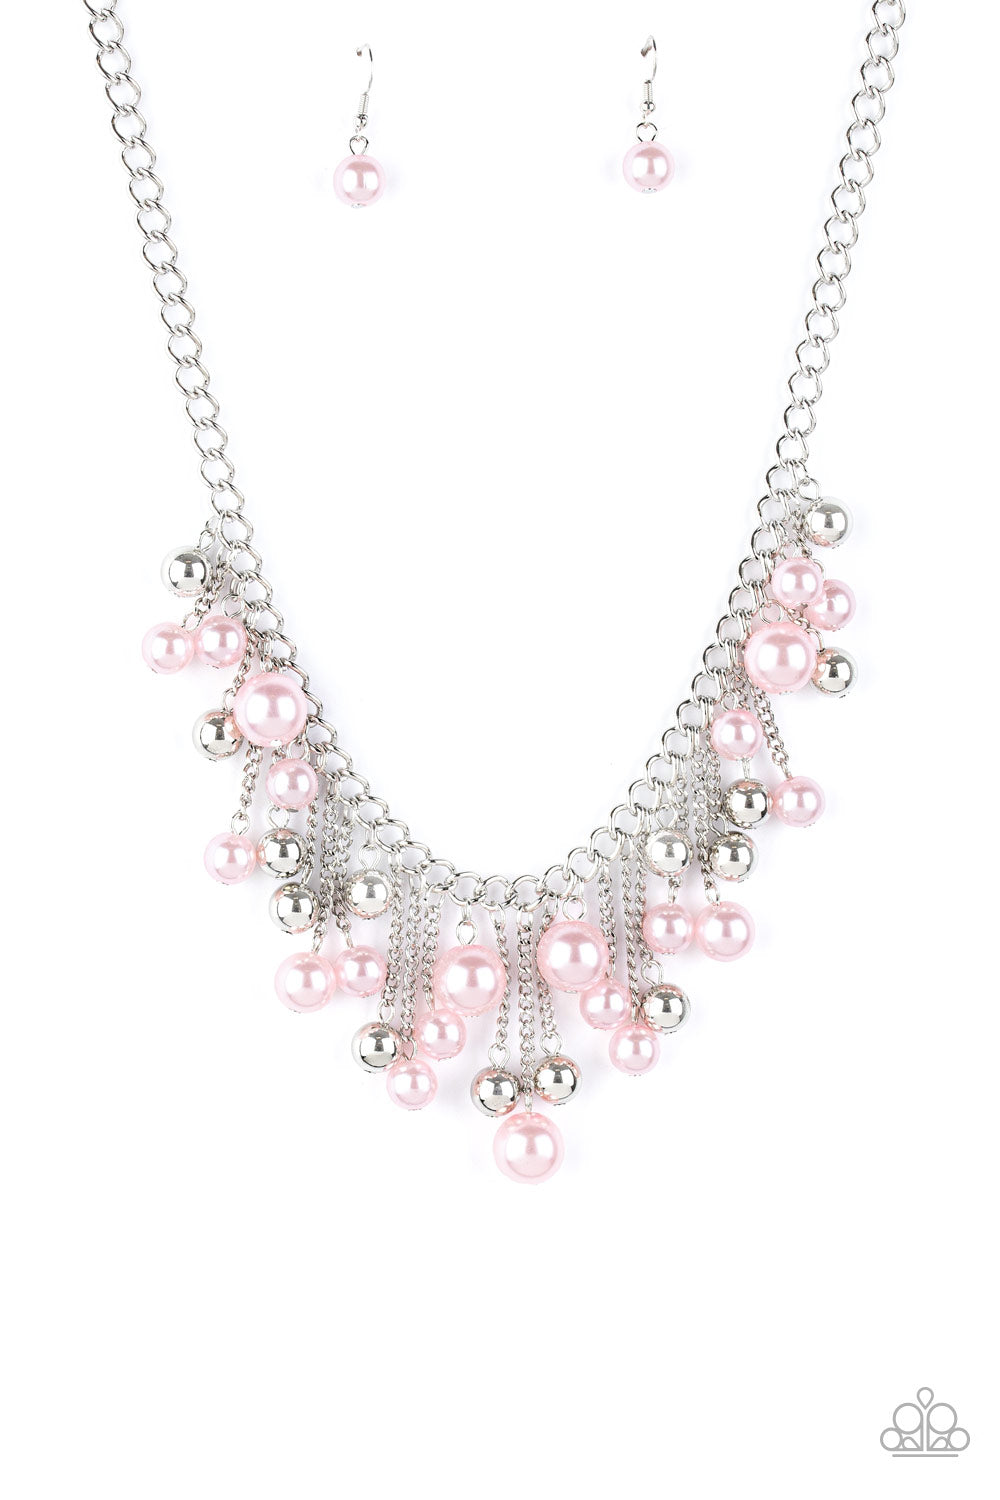 Broadway Belle - pink - Paparazzi necklace – JewelryBlingThing